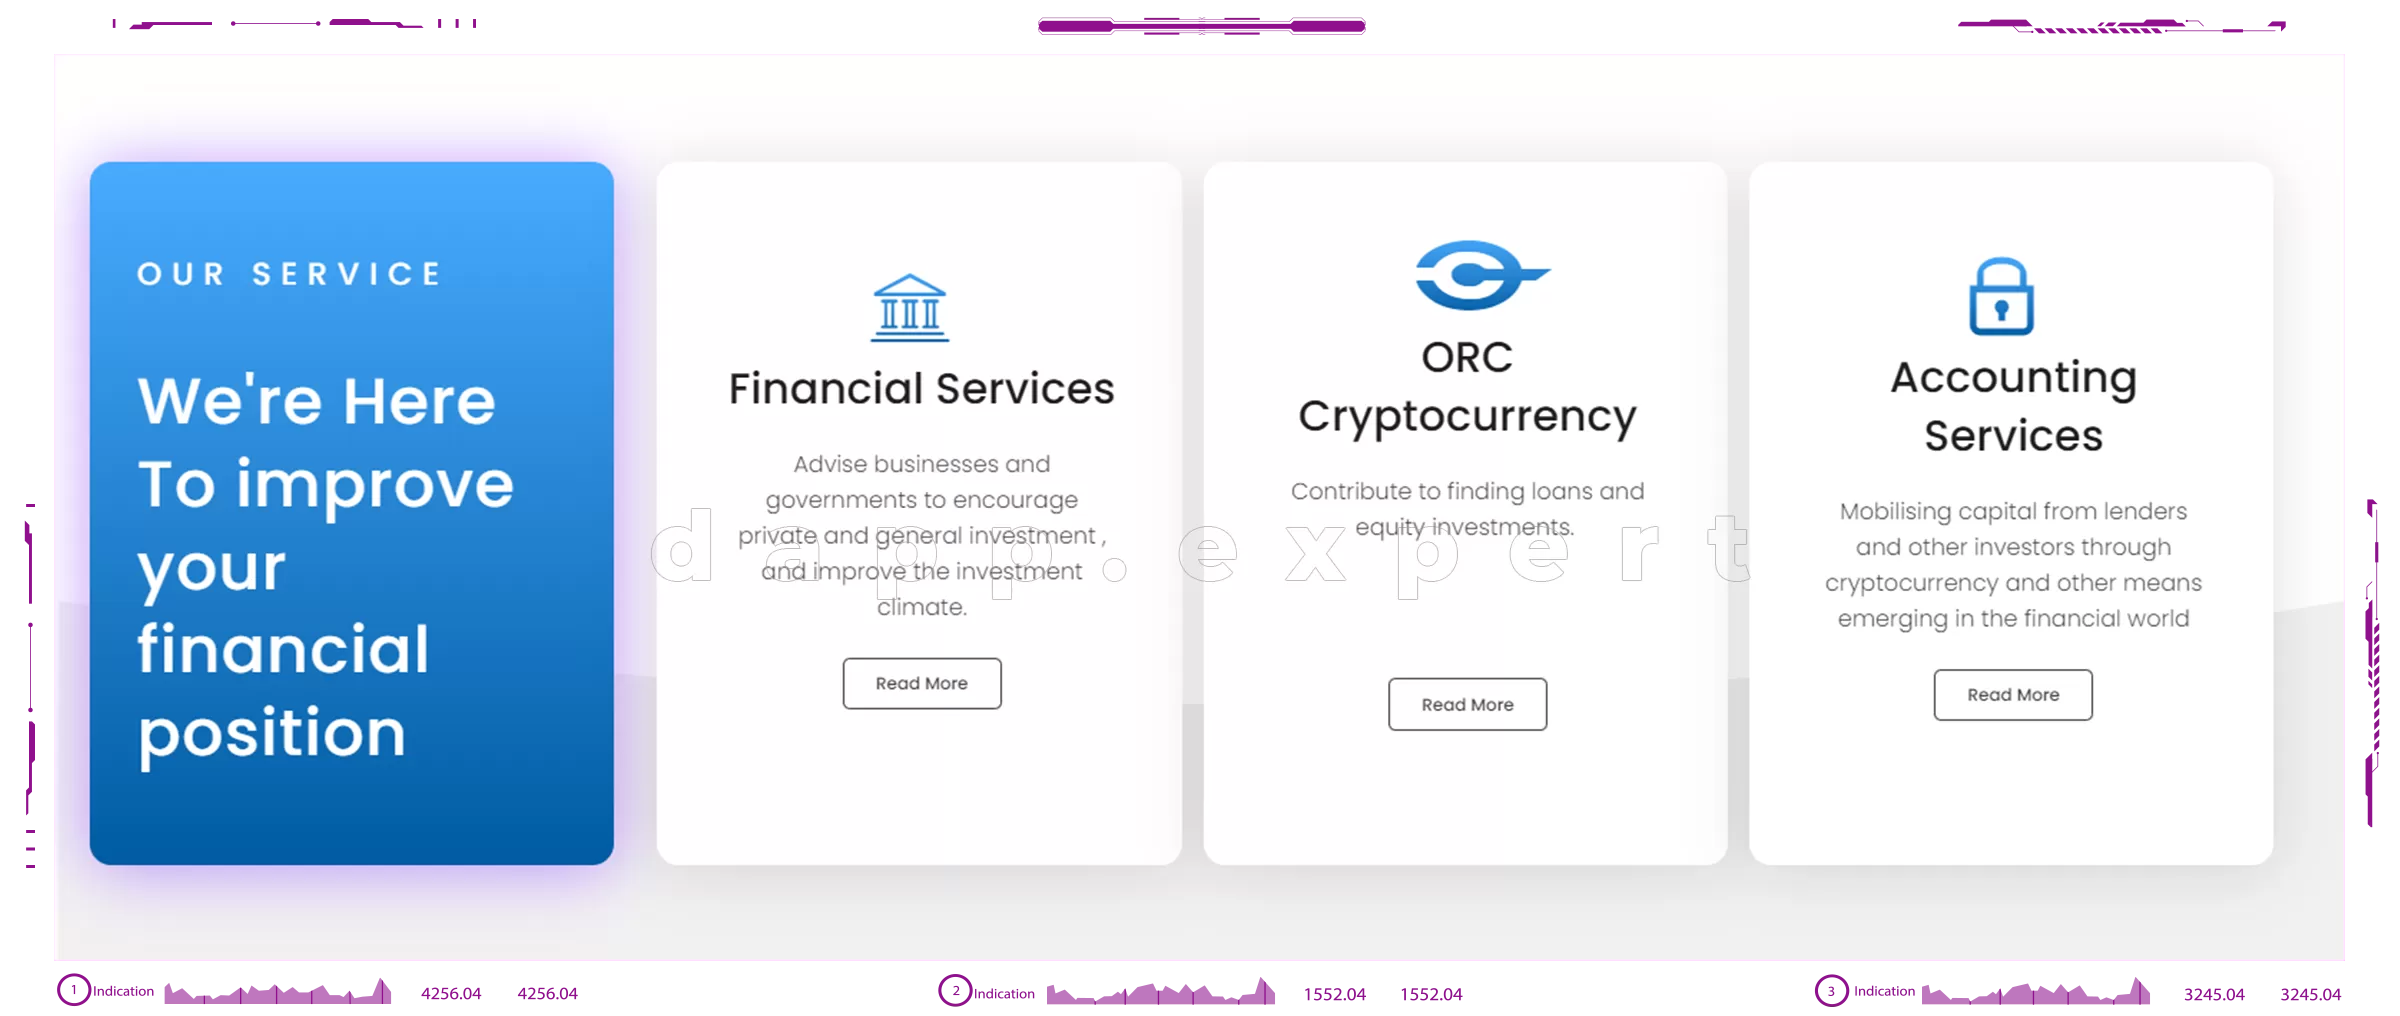 ORC Cryptocurrency dapps